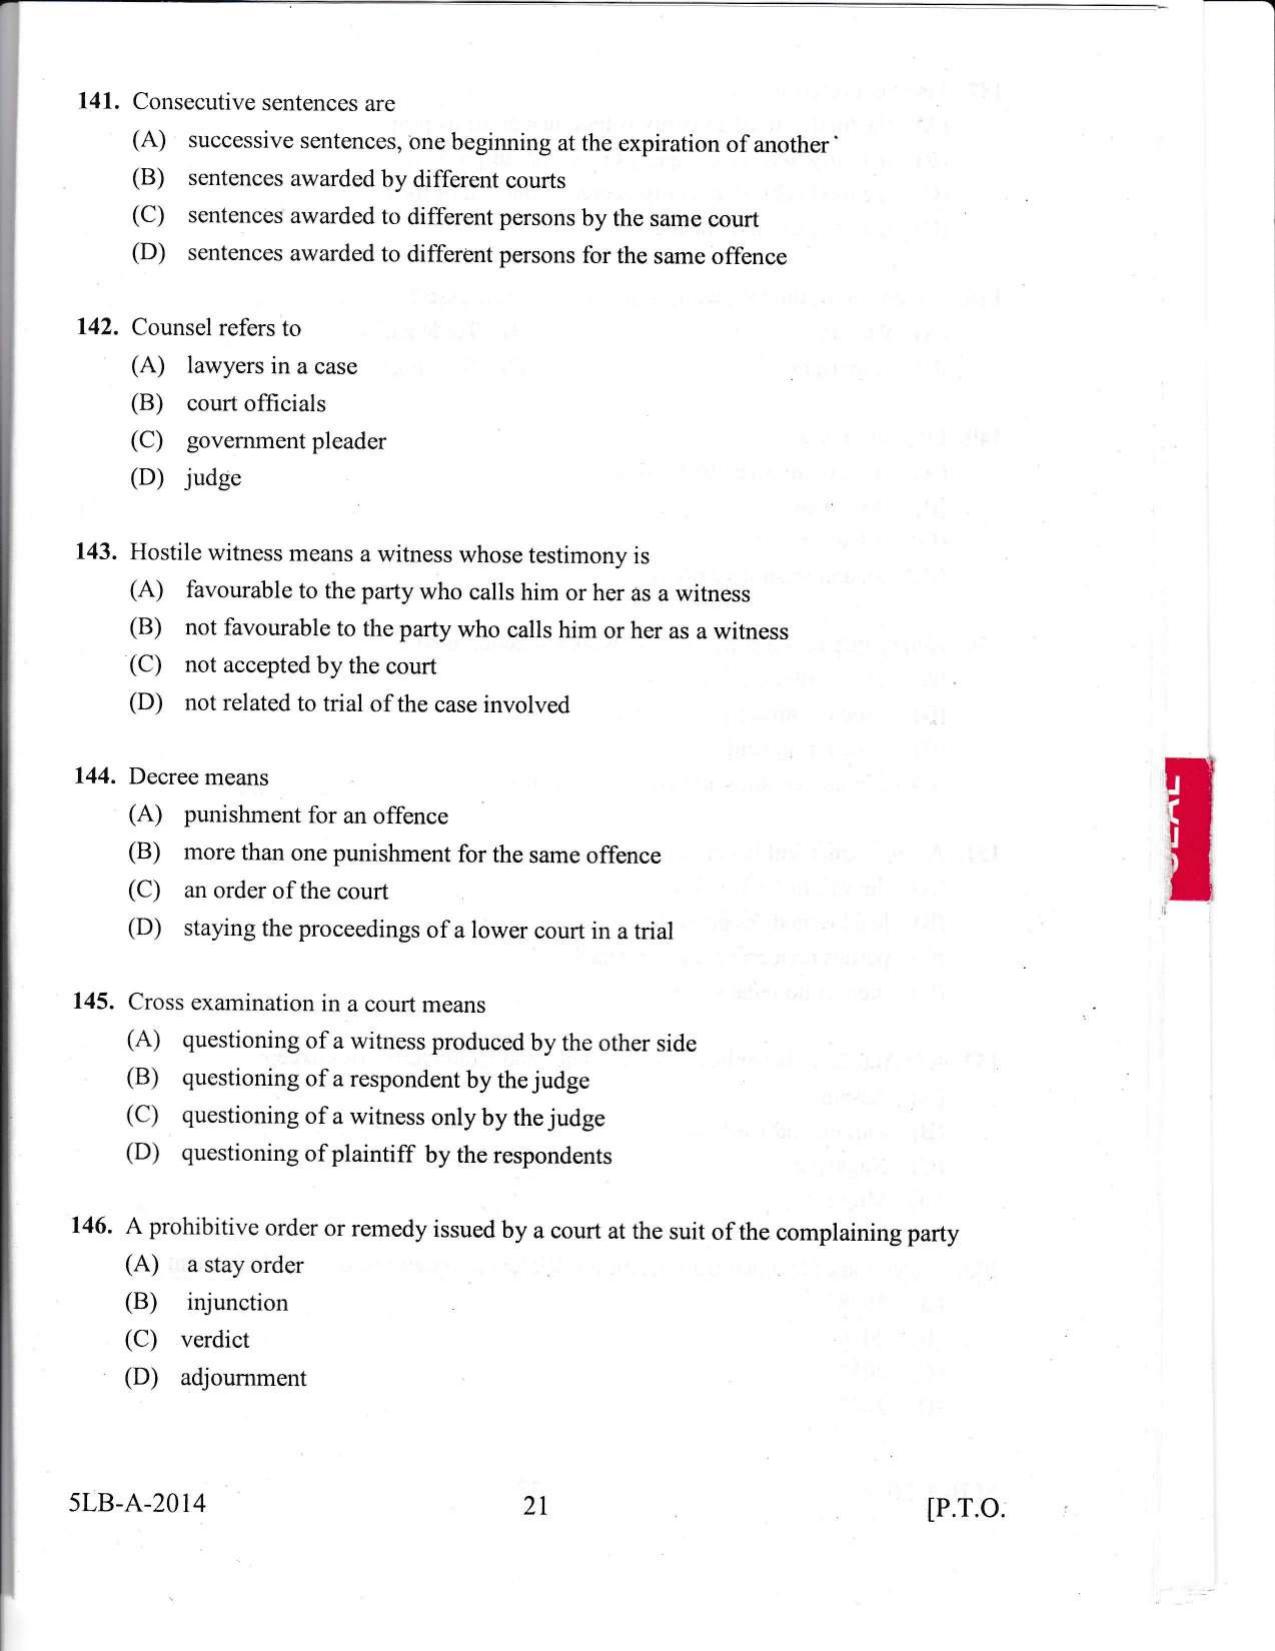 KLEE 5 Year LLB Exam 2014 Question Paper - Page 21